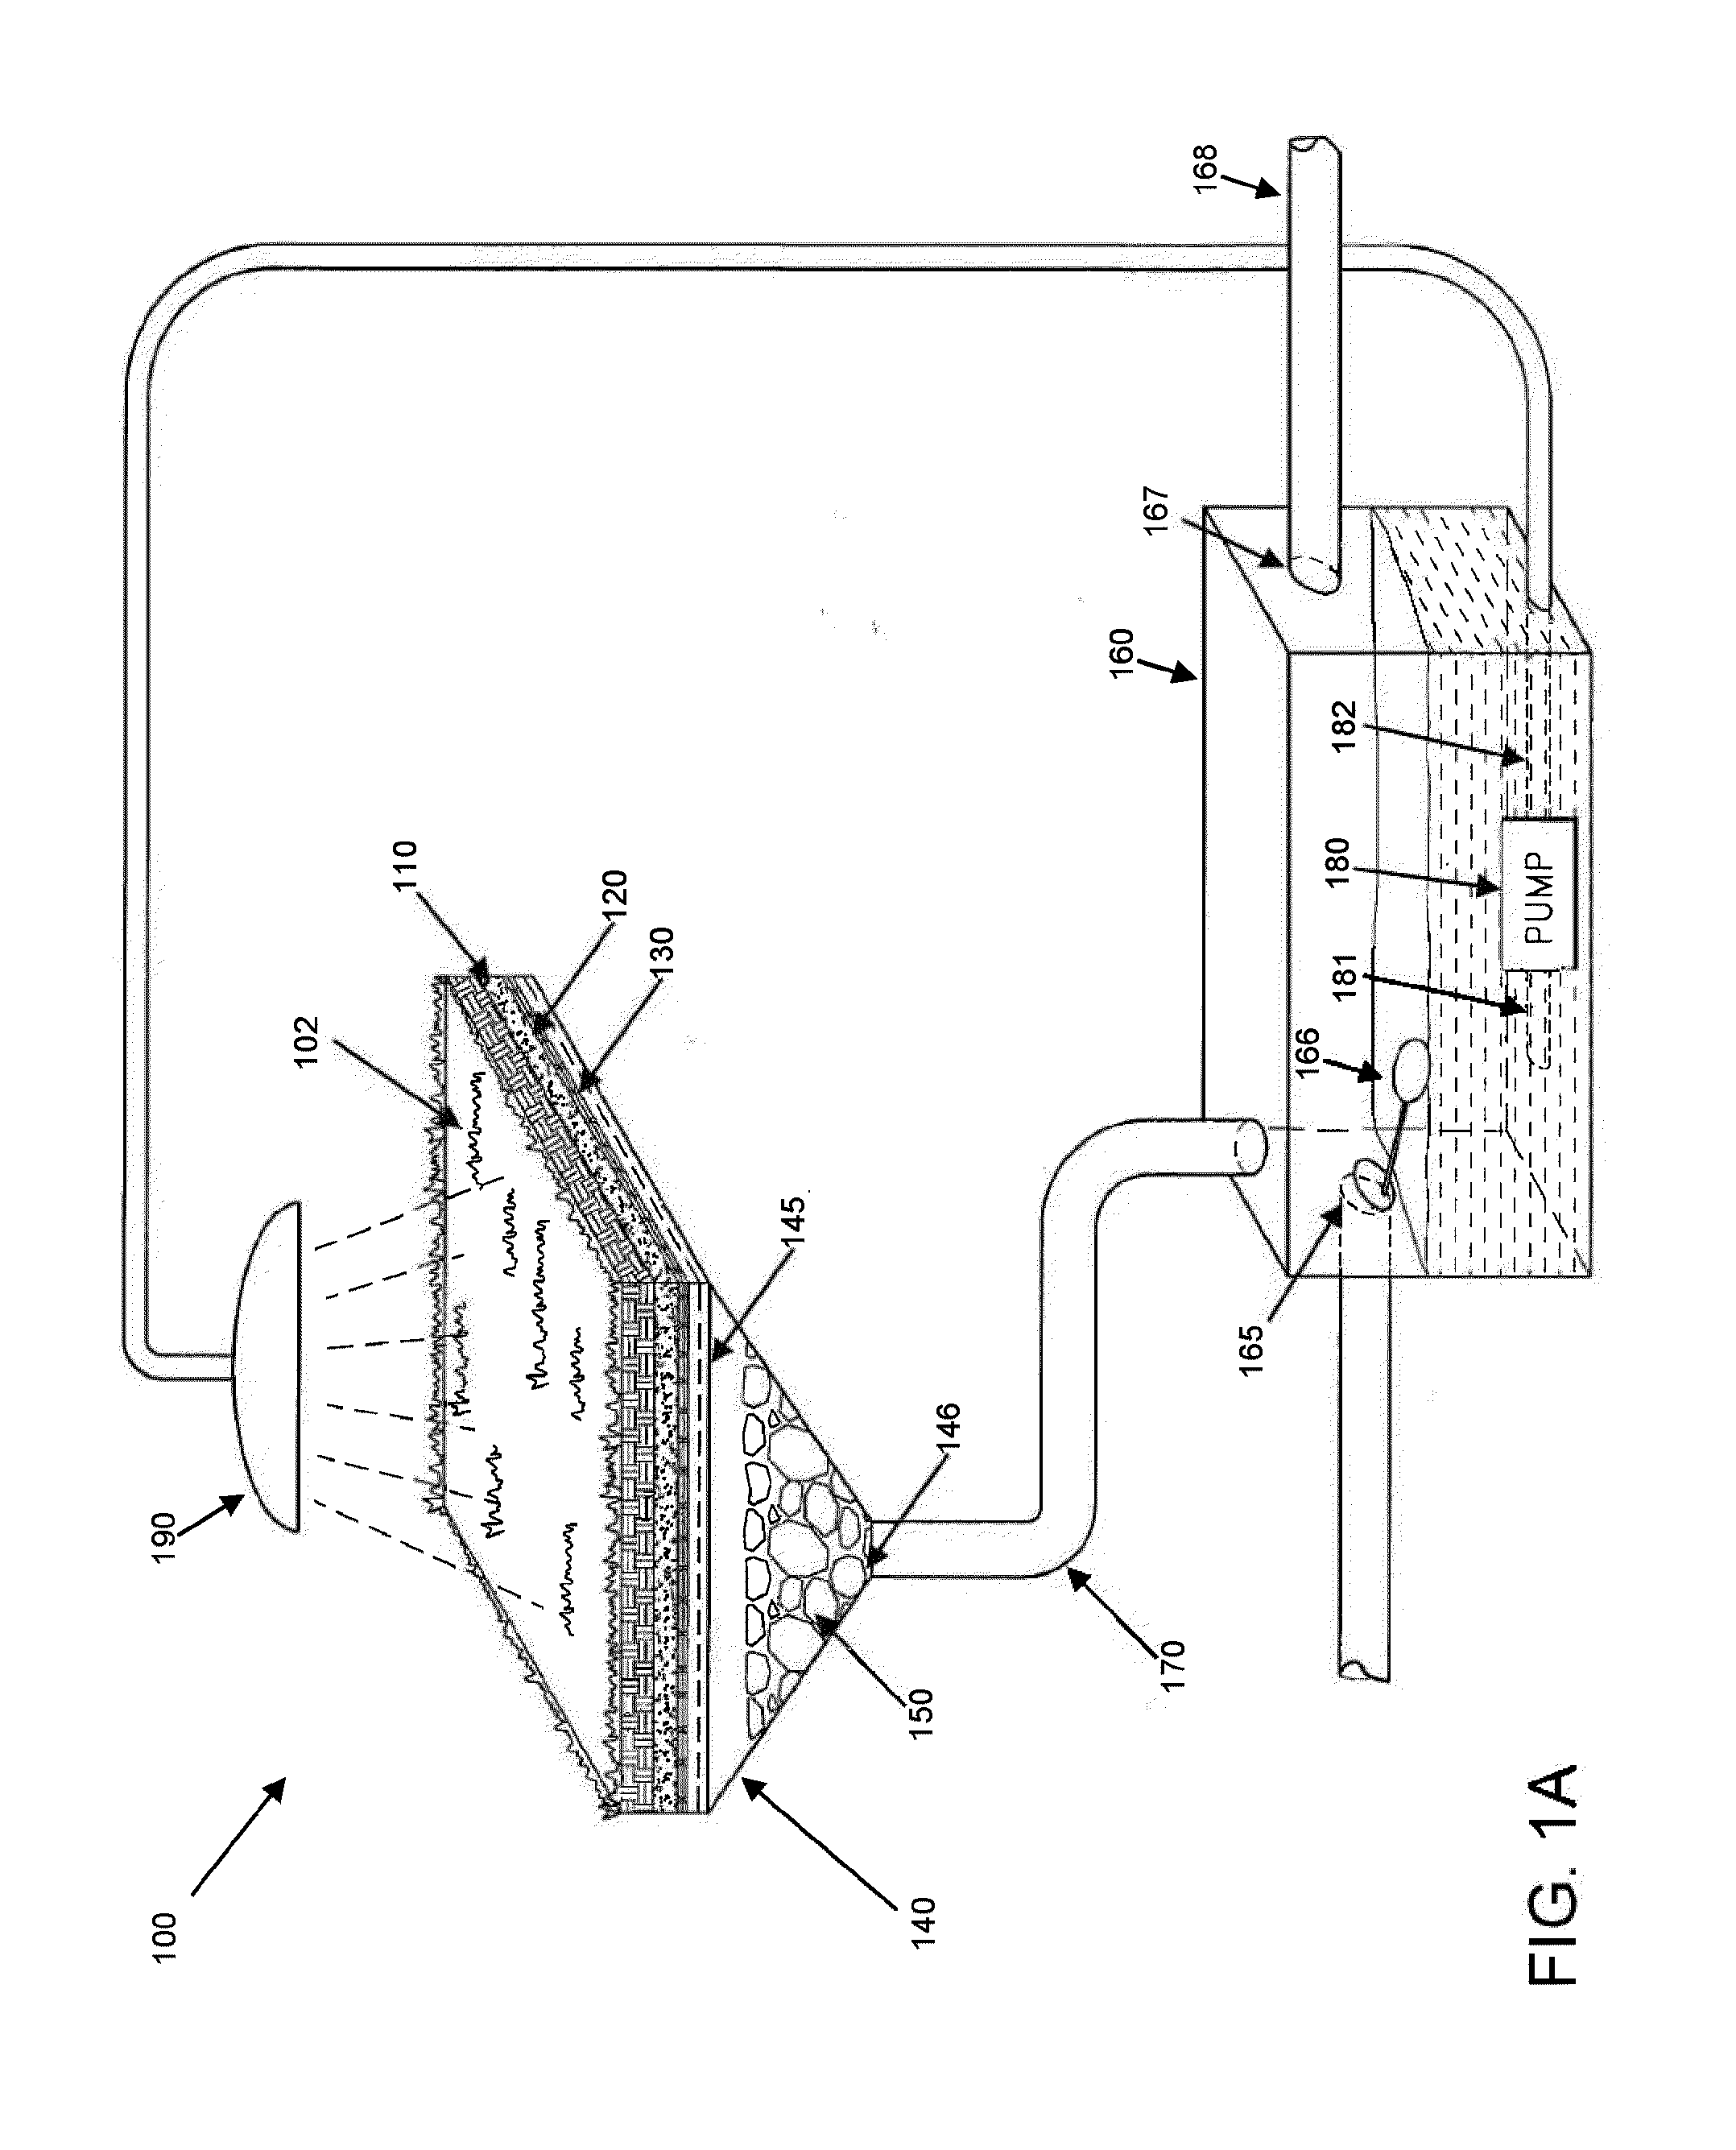 Systems and methods for water harvesting and recycling